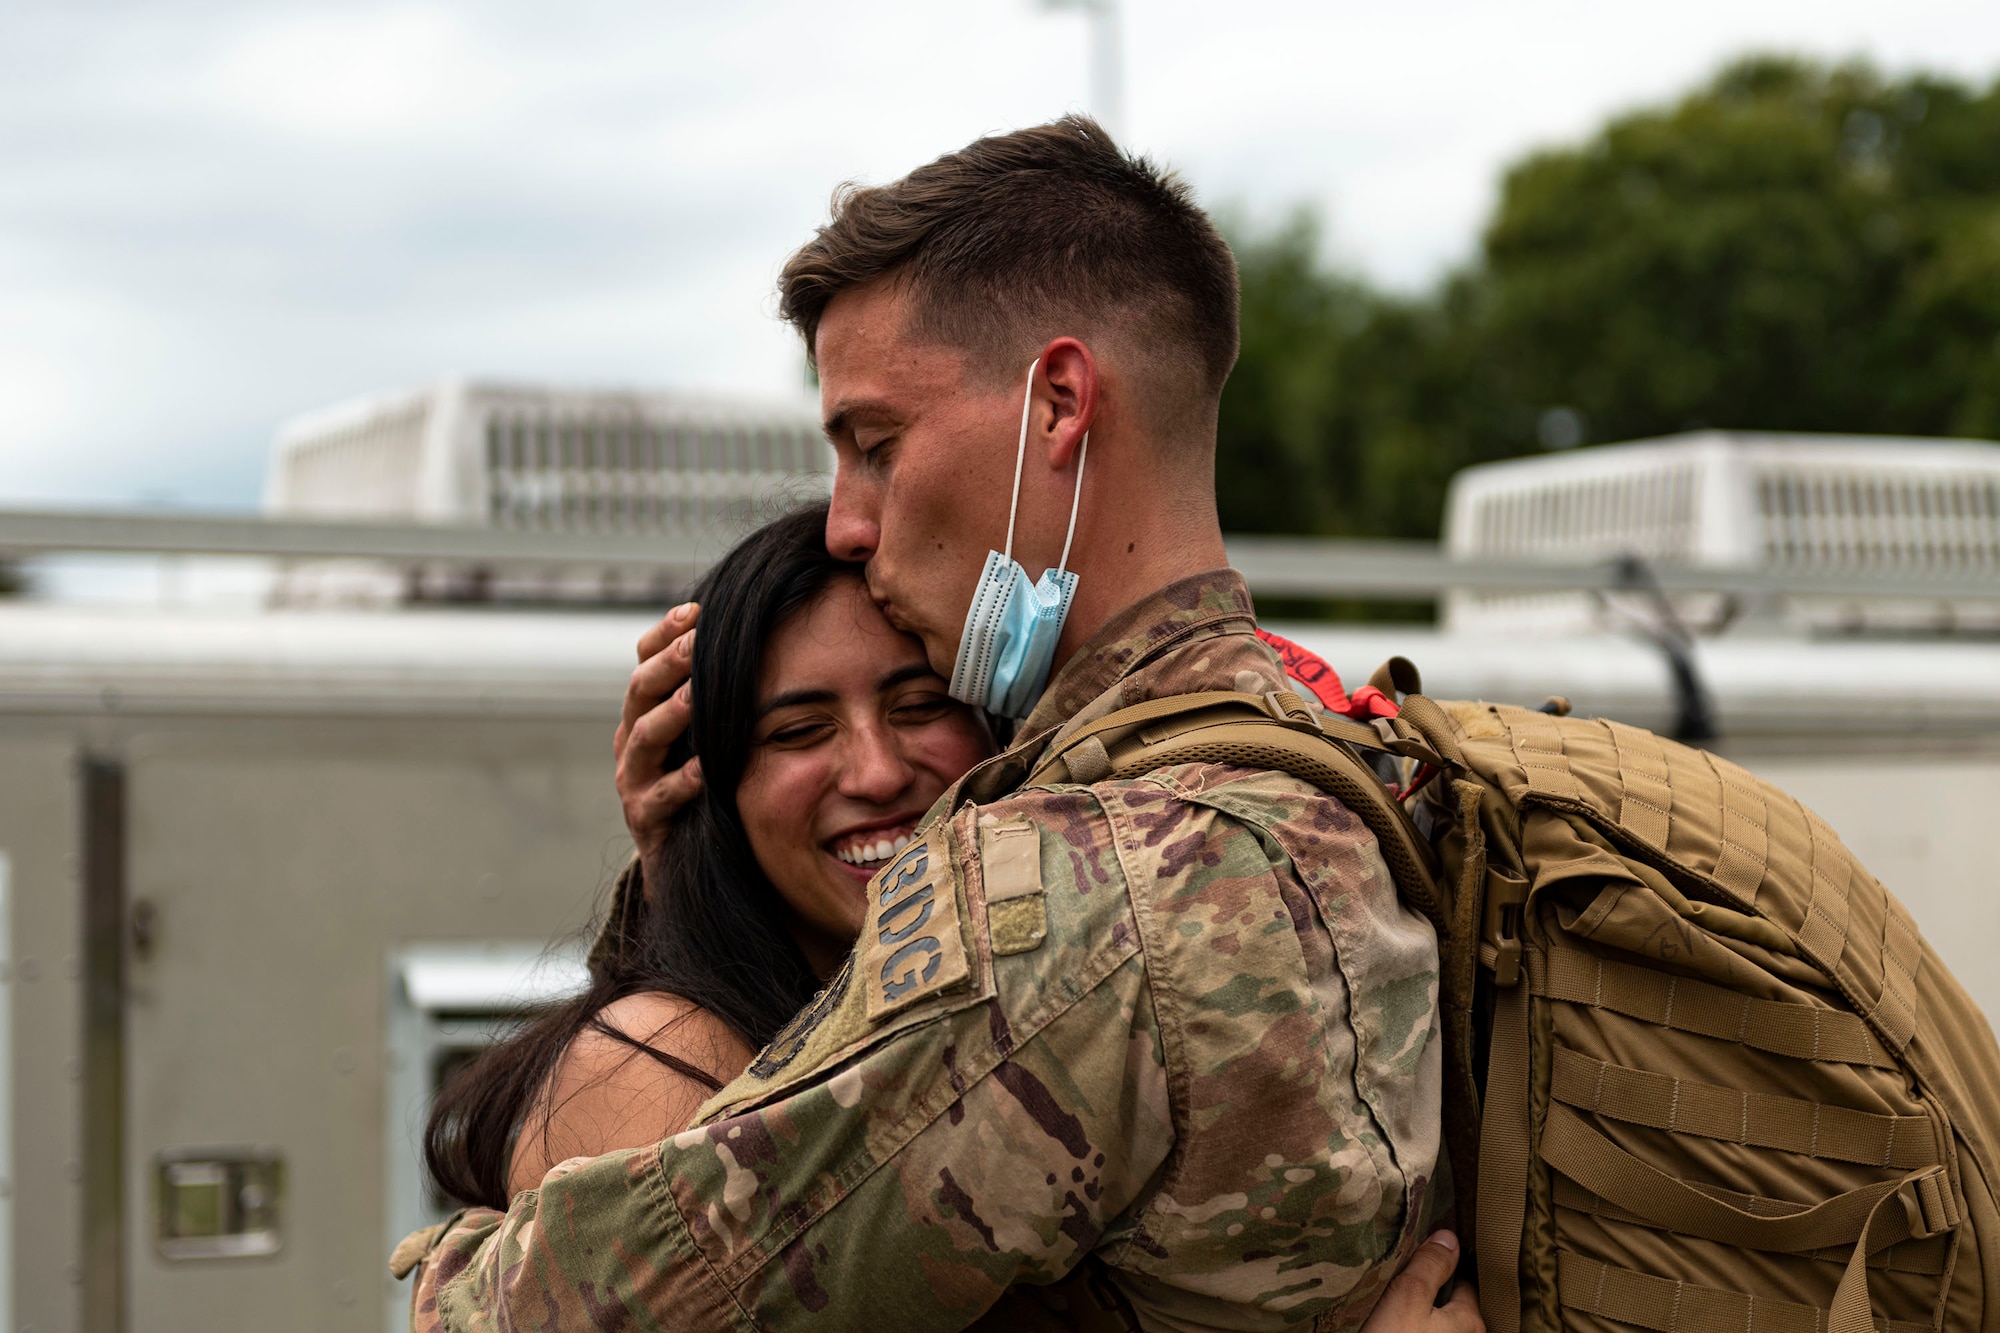 Photo of Airman kissing his wife.